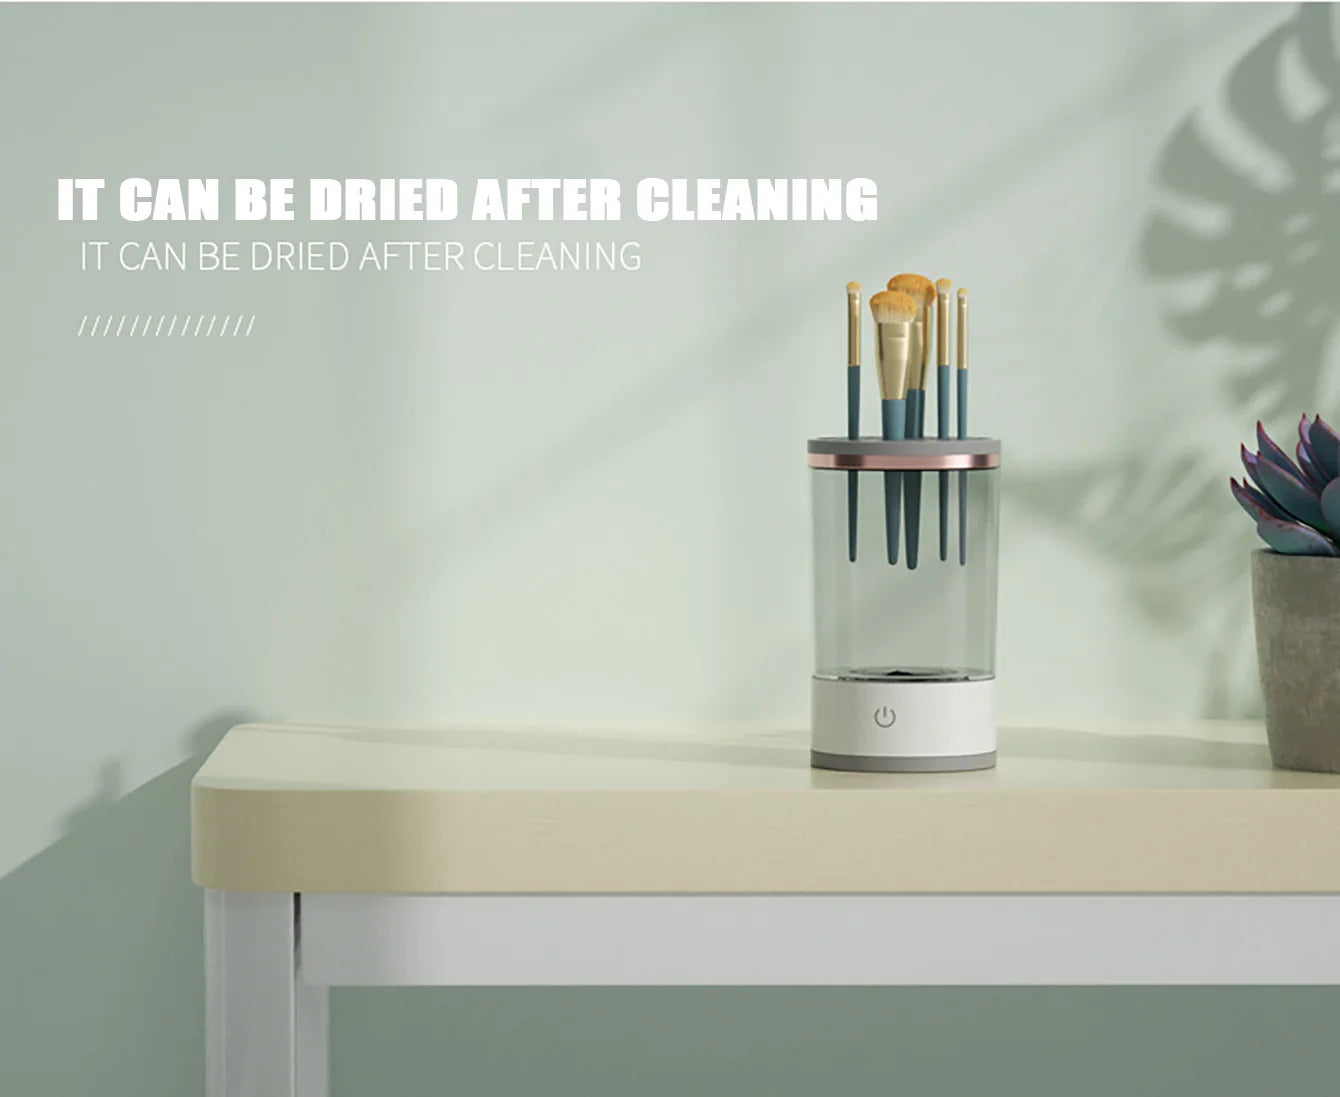 Makeup Brush Cleaner with Quick Dry Technology - USB Powered